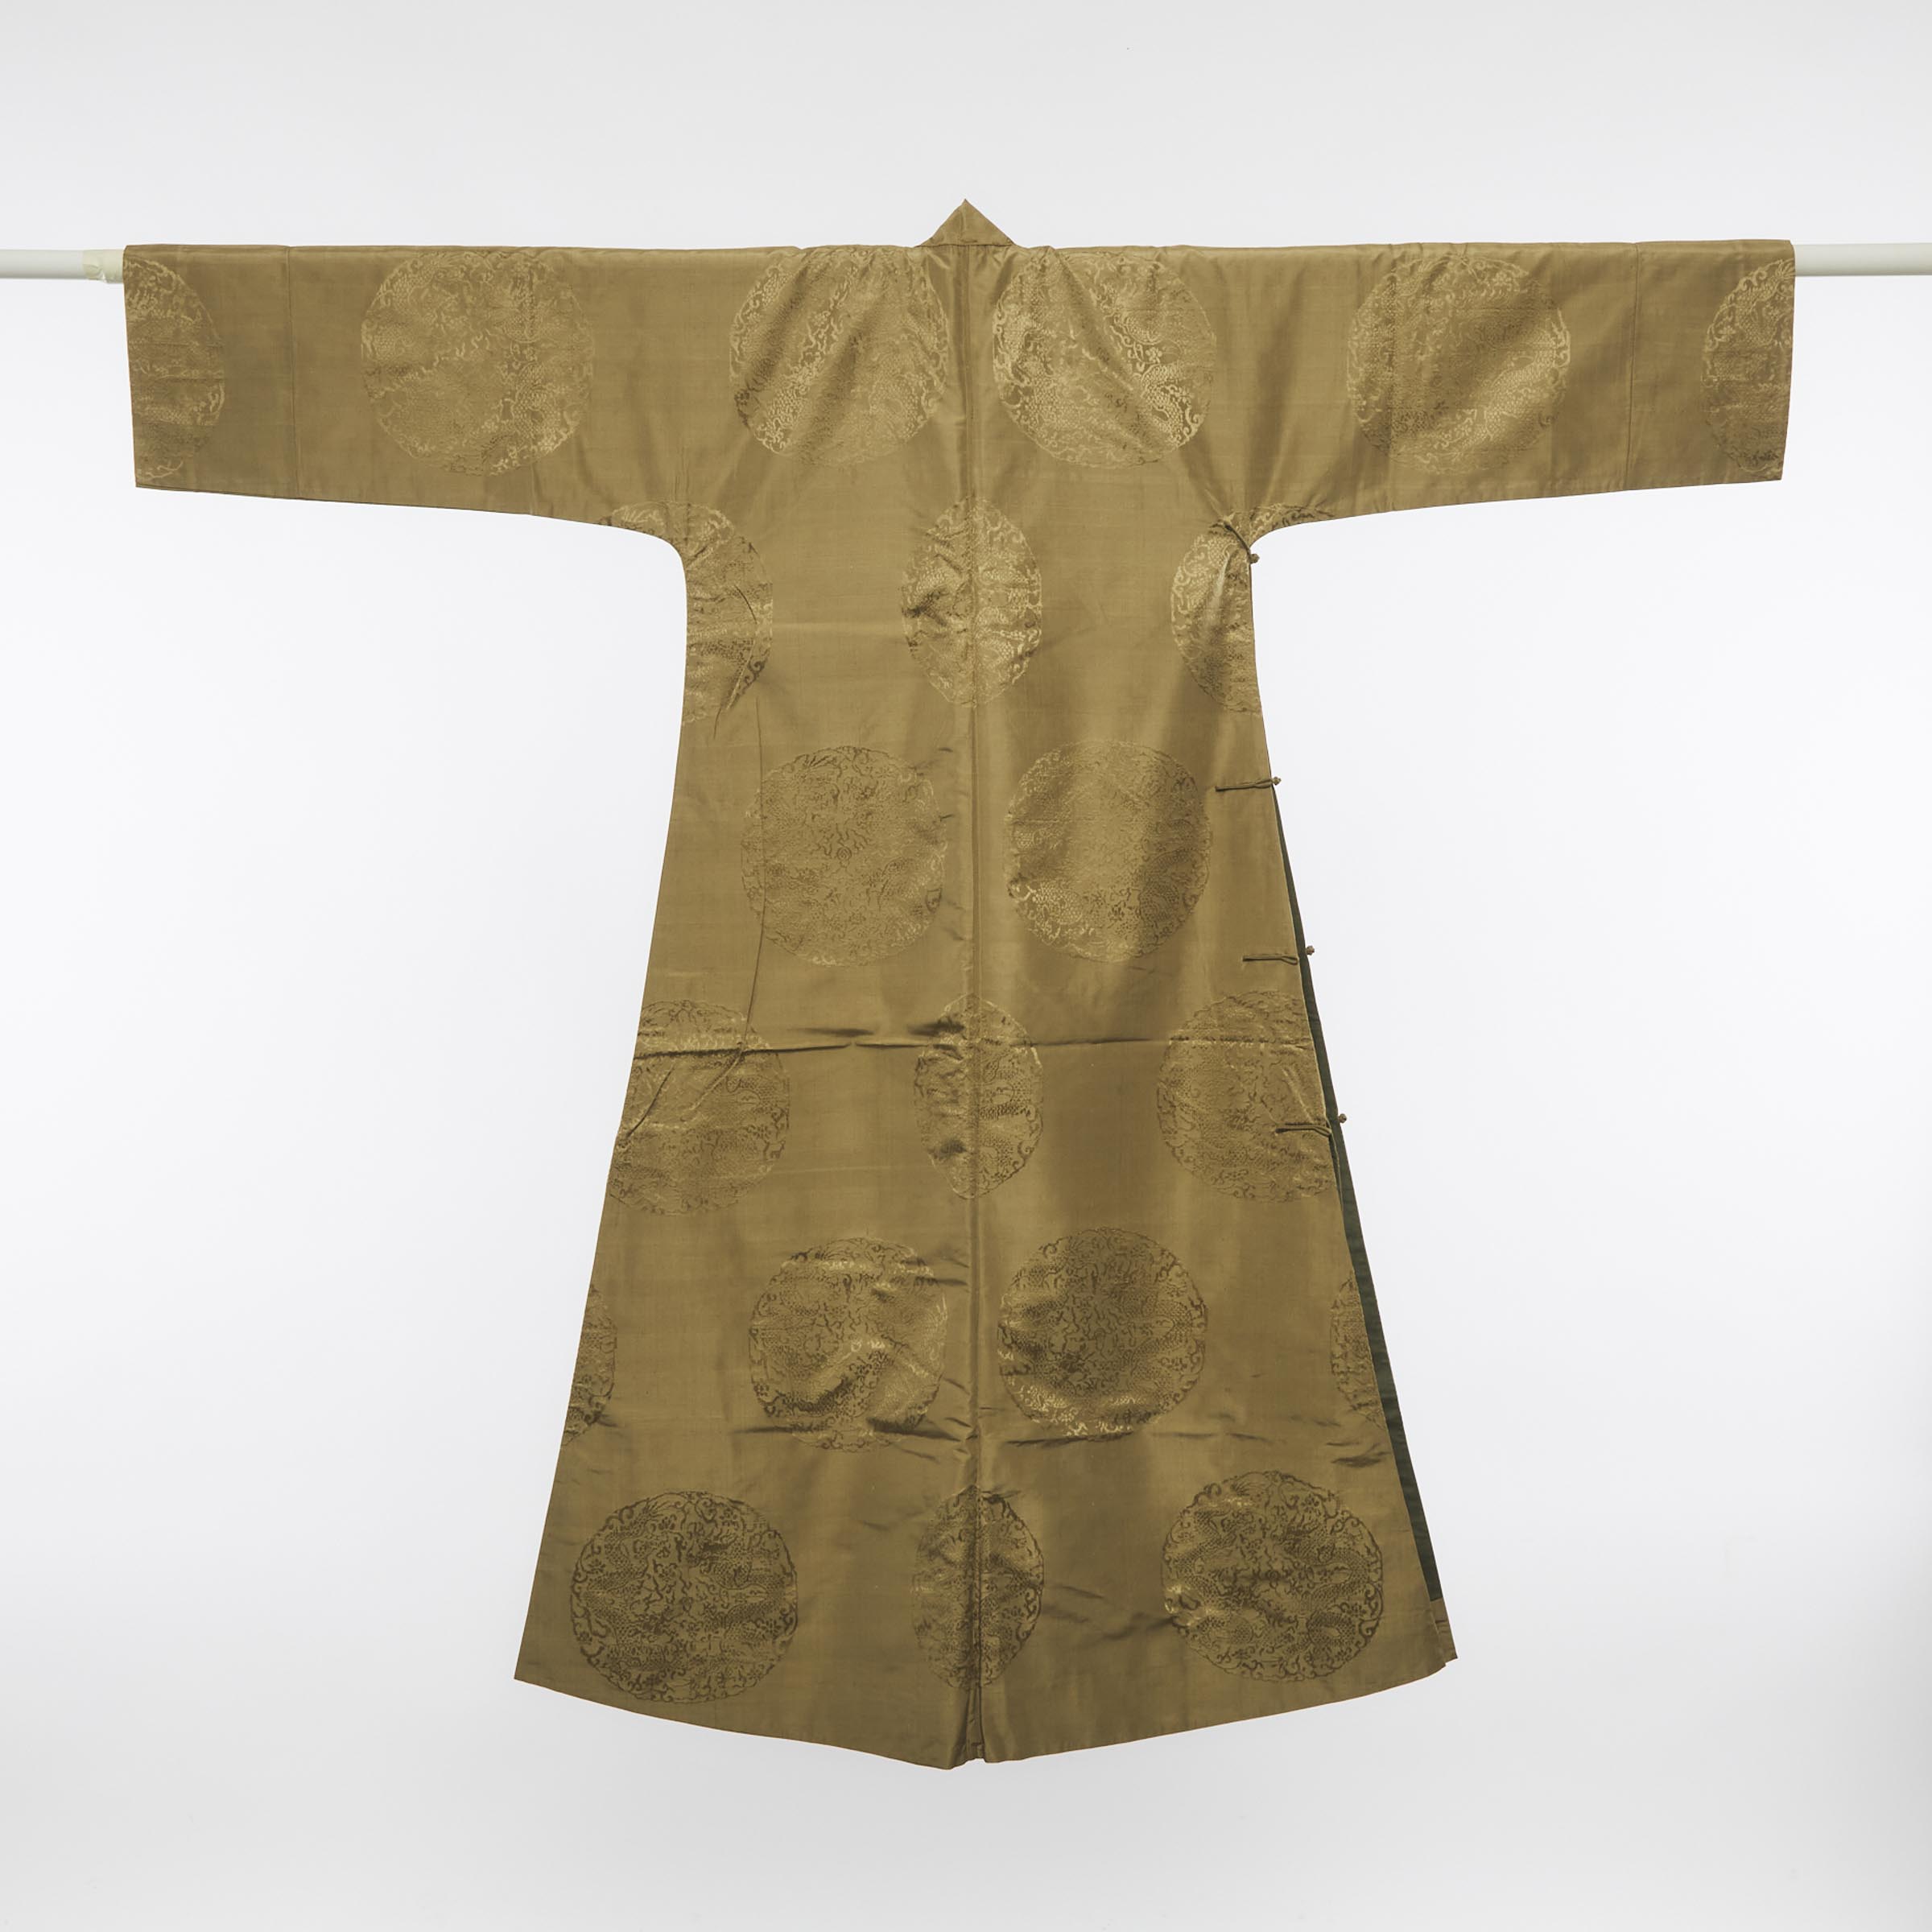 A Yellow-Ground Embroidered 'Dragon' Robe, Chang Fu, 19th Century